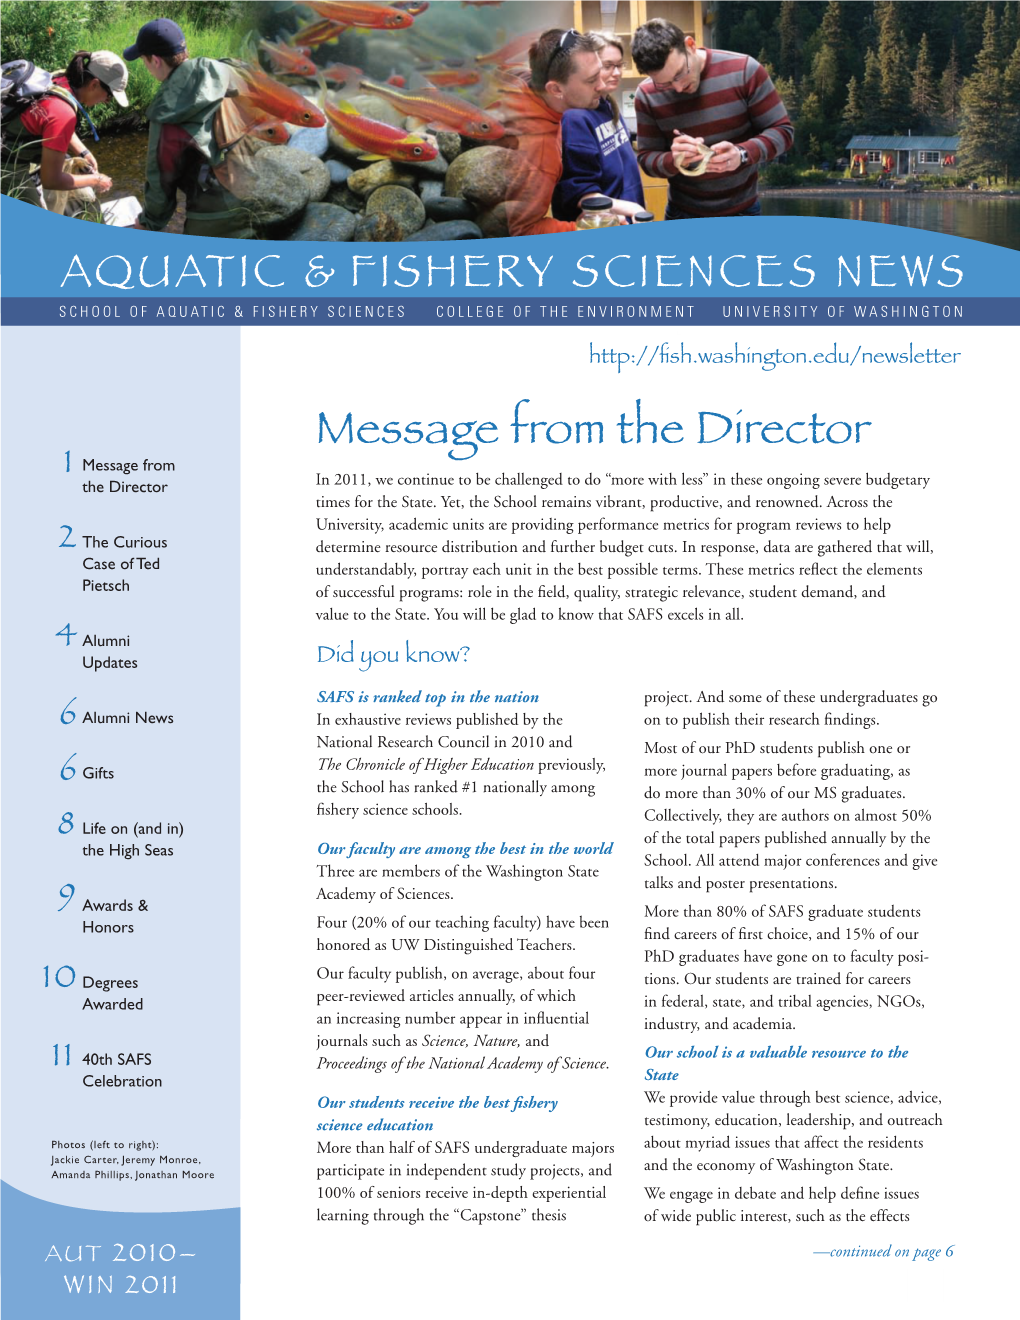 Message from the Director AQUATIC & FISHERY SCIENCES NEWS